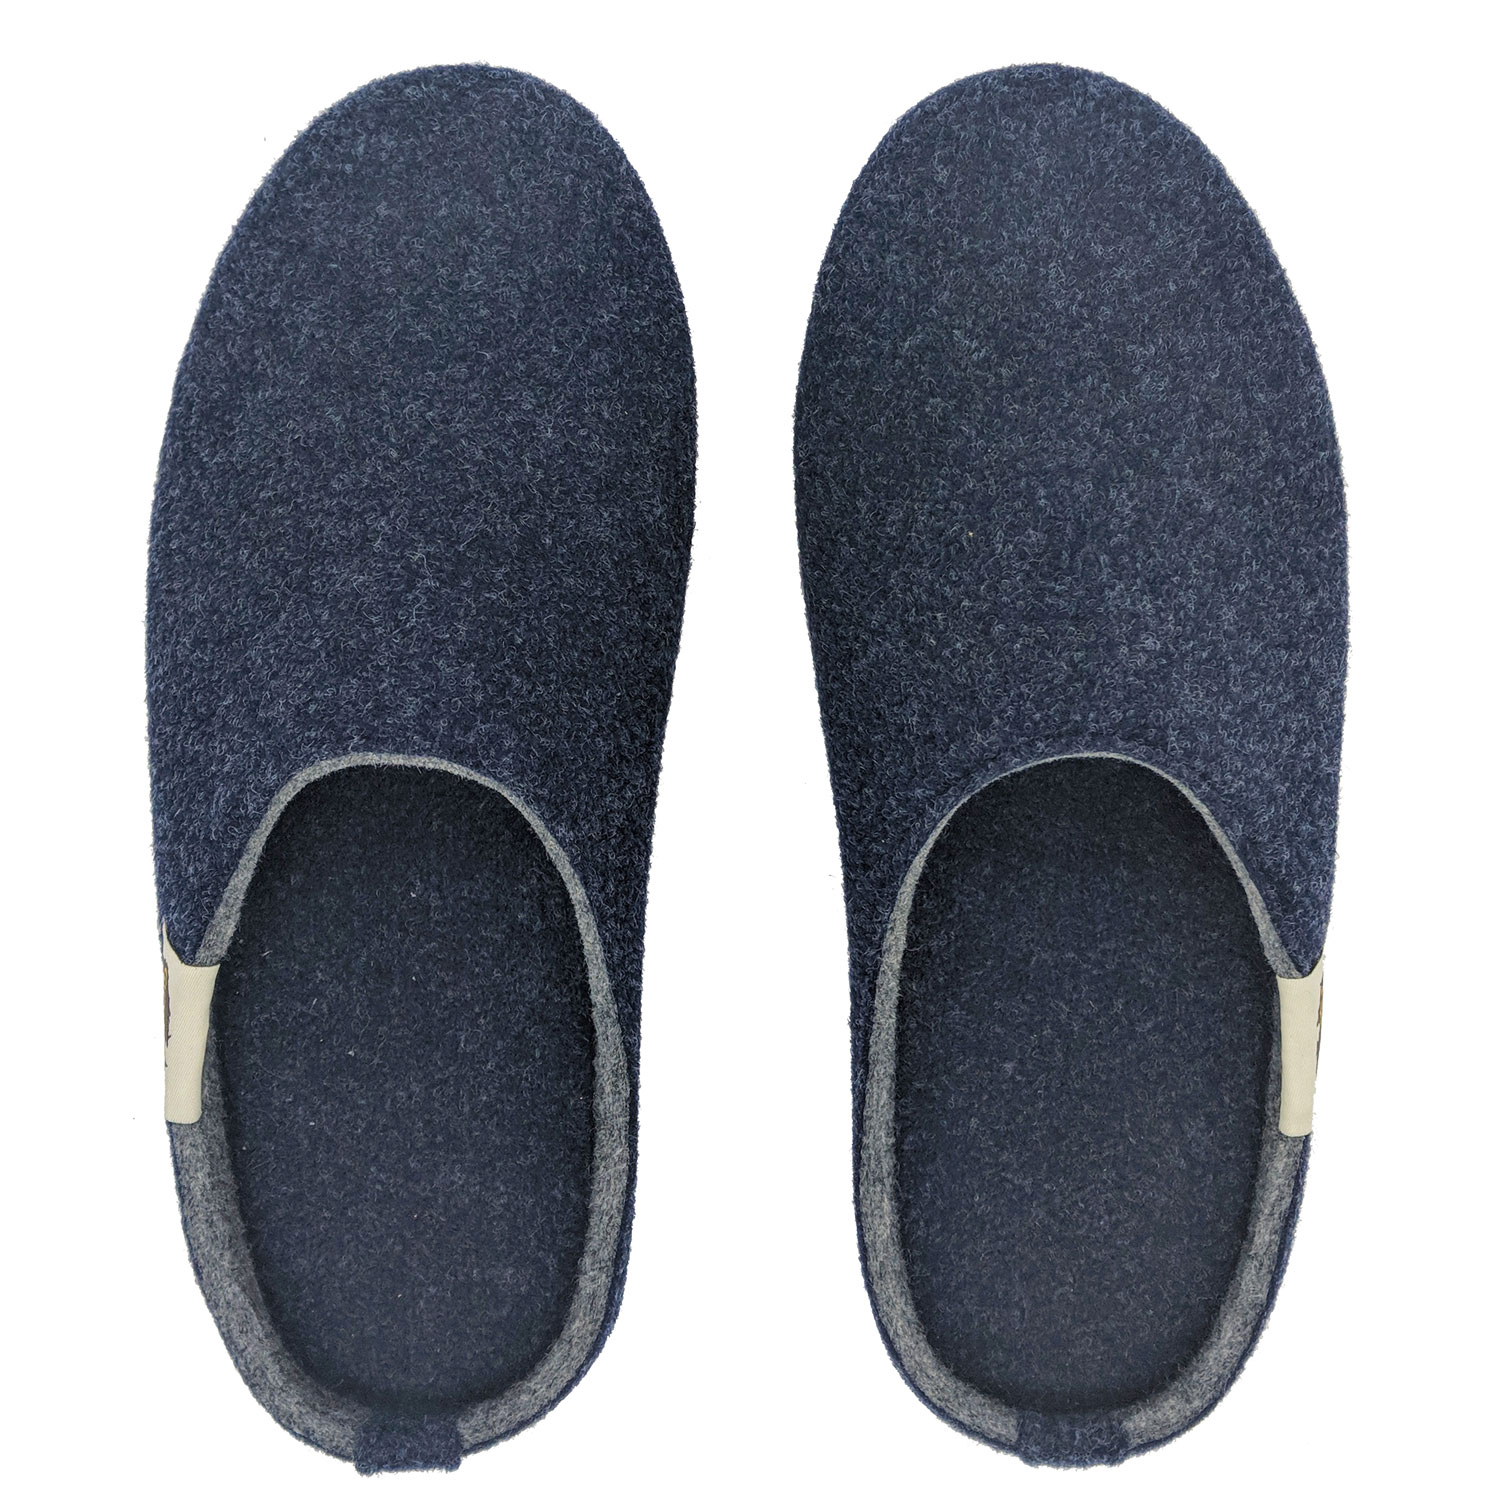 Gumbies Outback Slipper, navy/gray